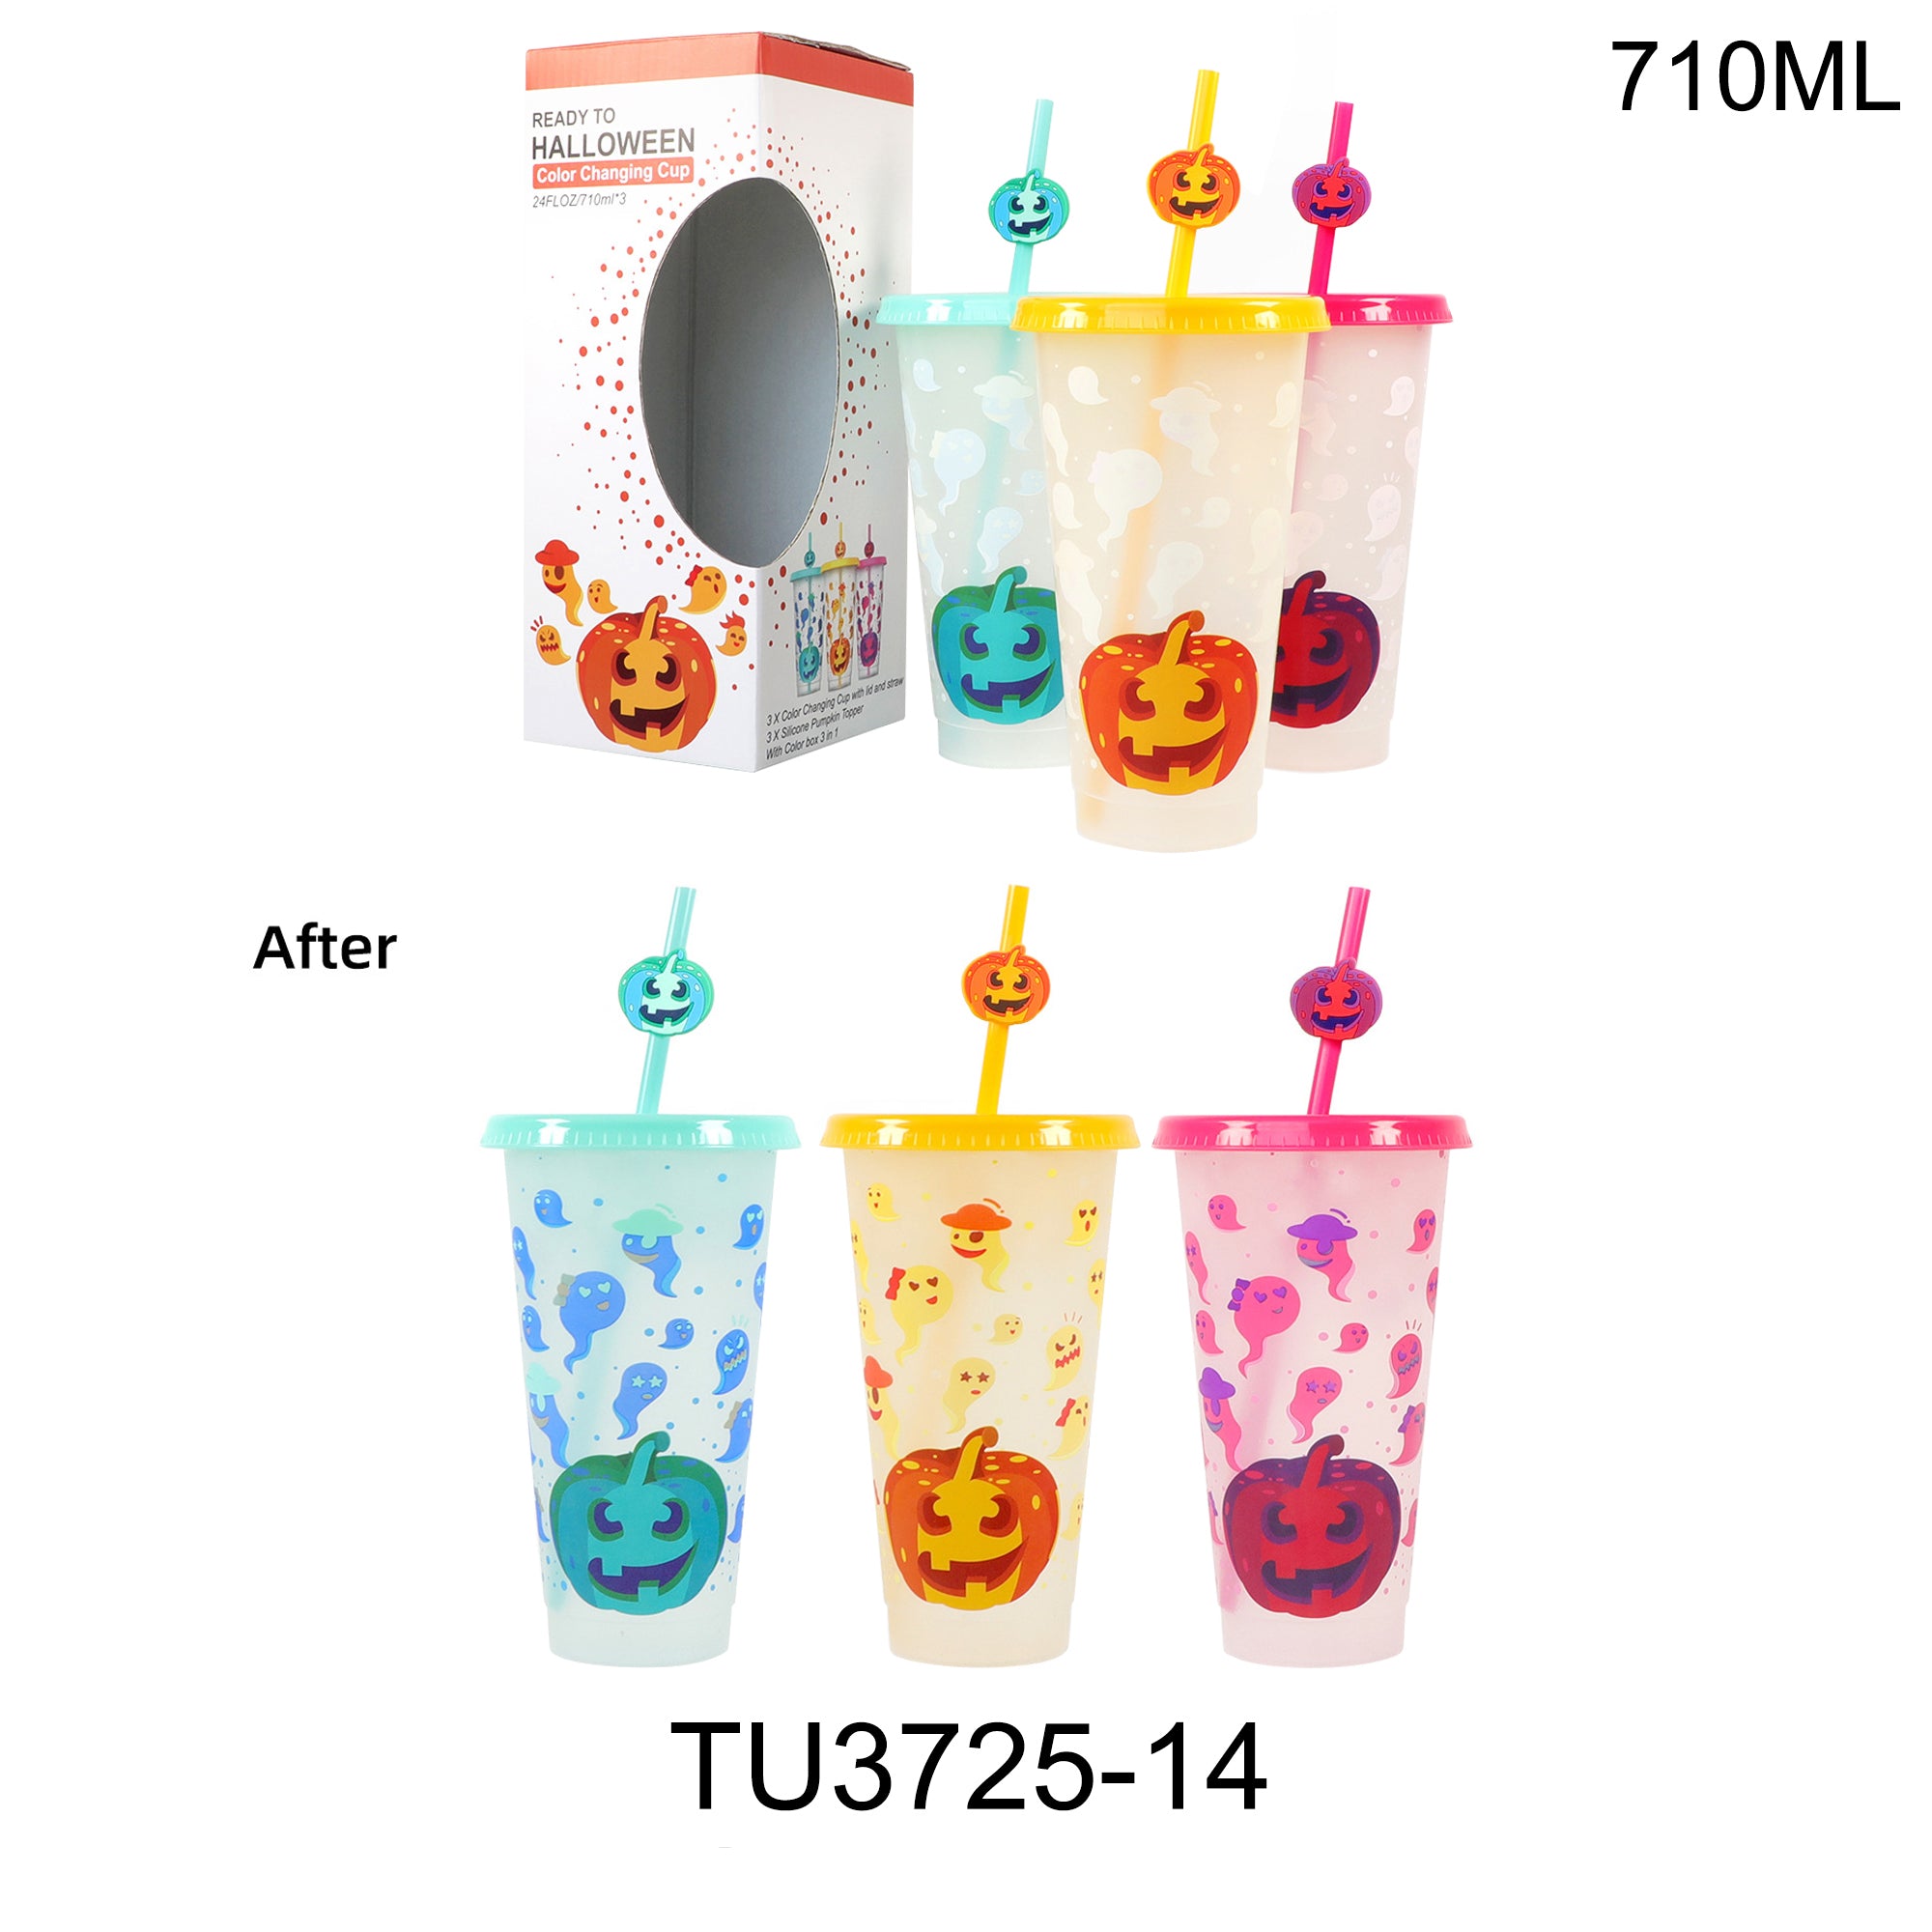 COLOR CHANGING HALLOWEEN PUMPKIN VENTI TUMBLER WITH STRAW 3725-14 (12PC)